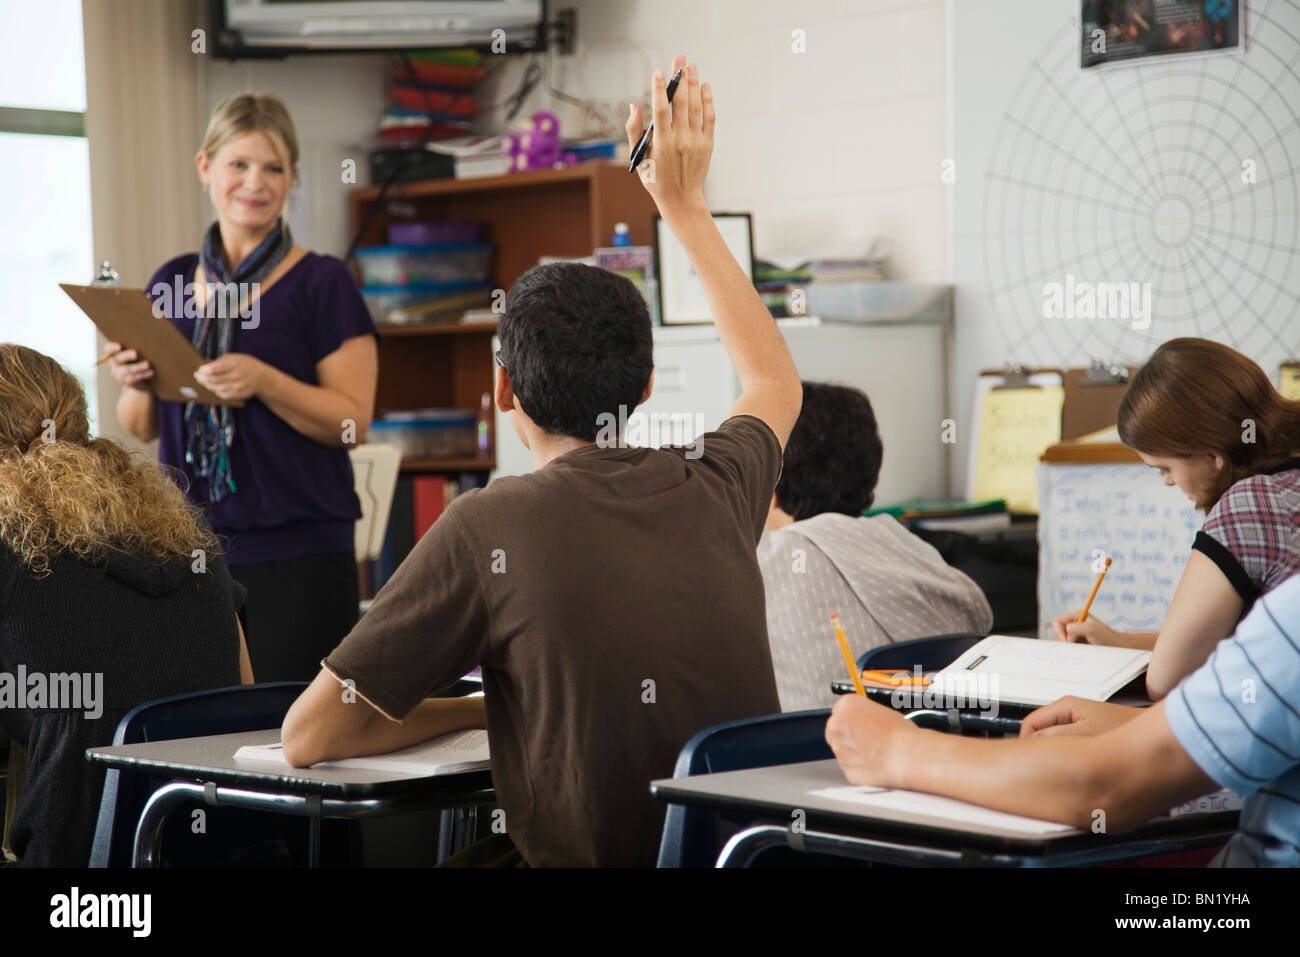 Student raising hand in class Banque D'Images